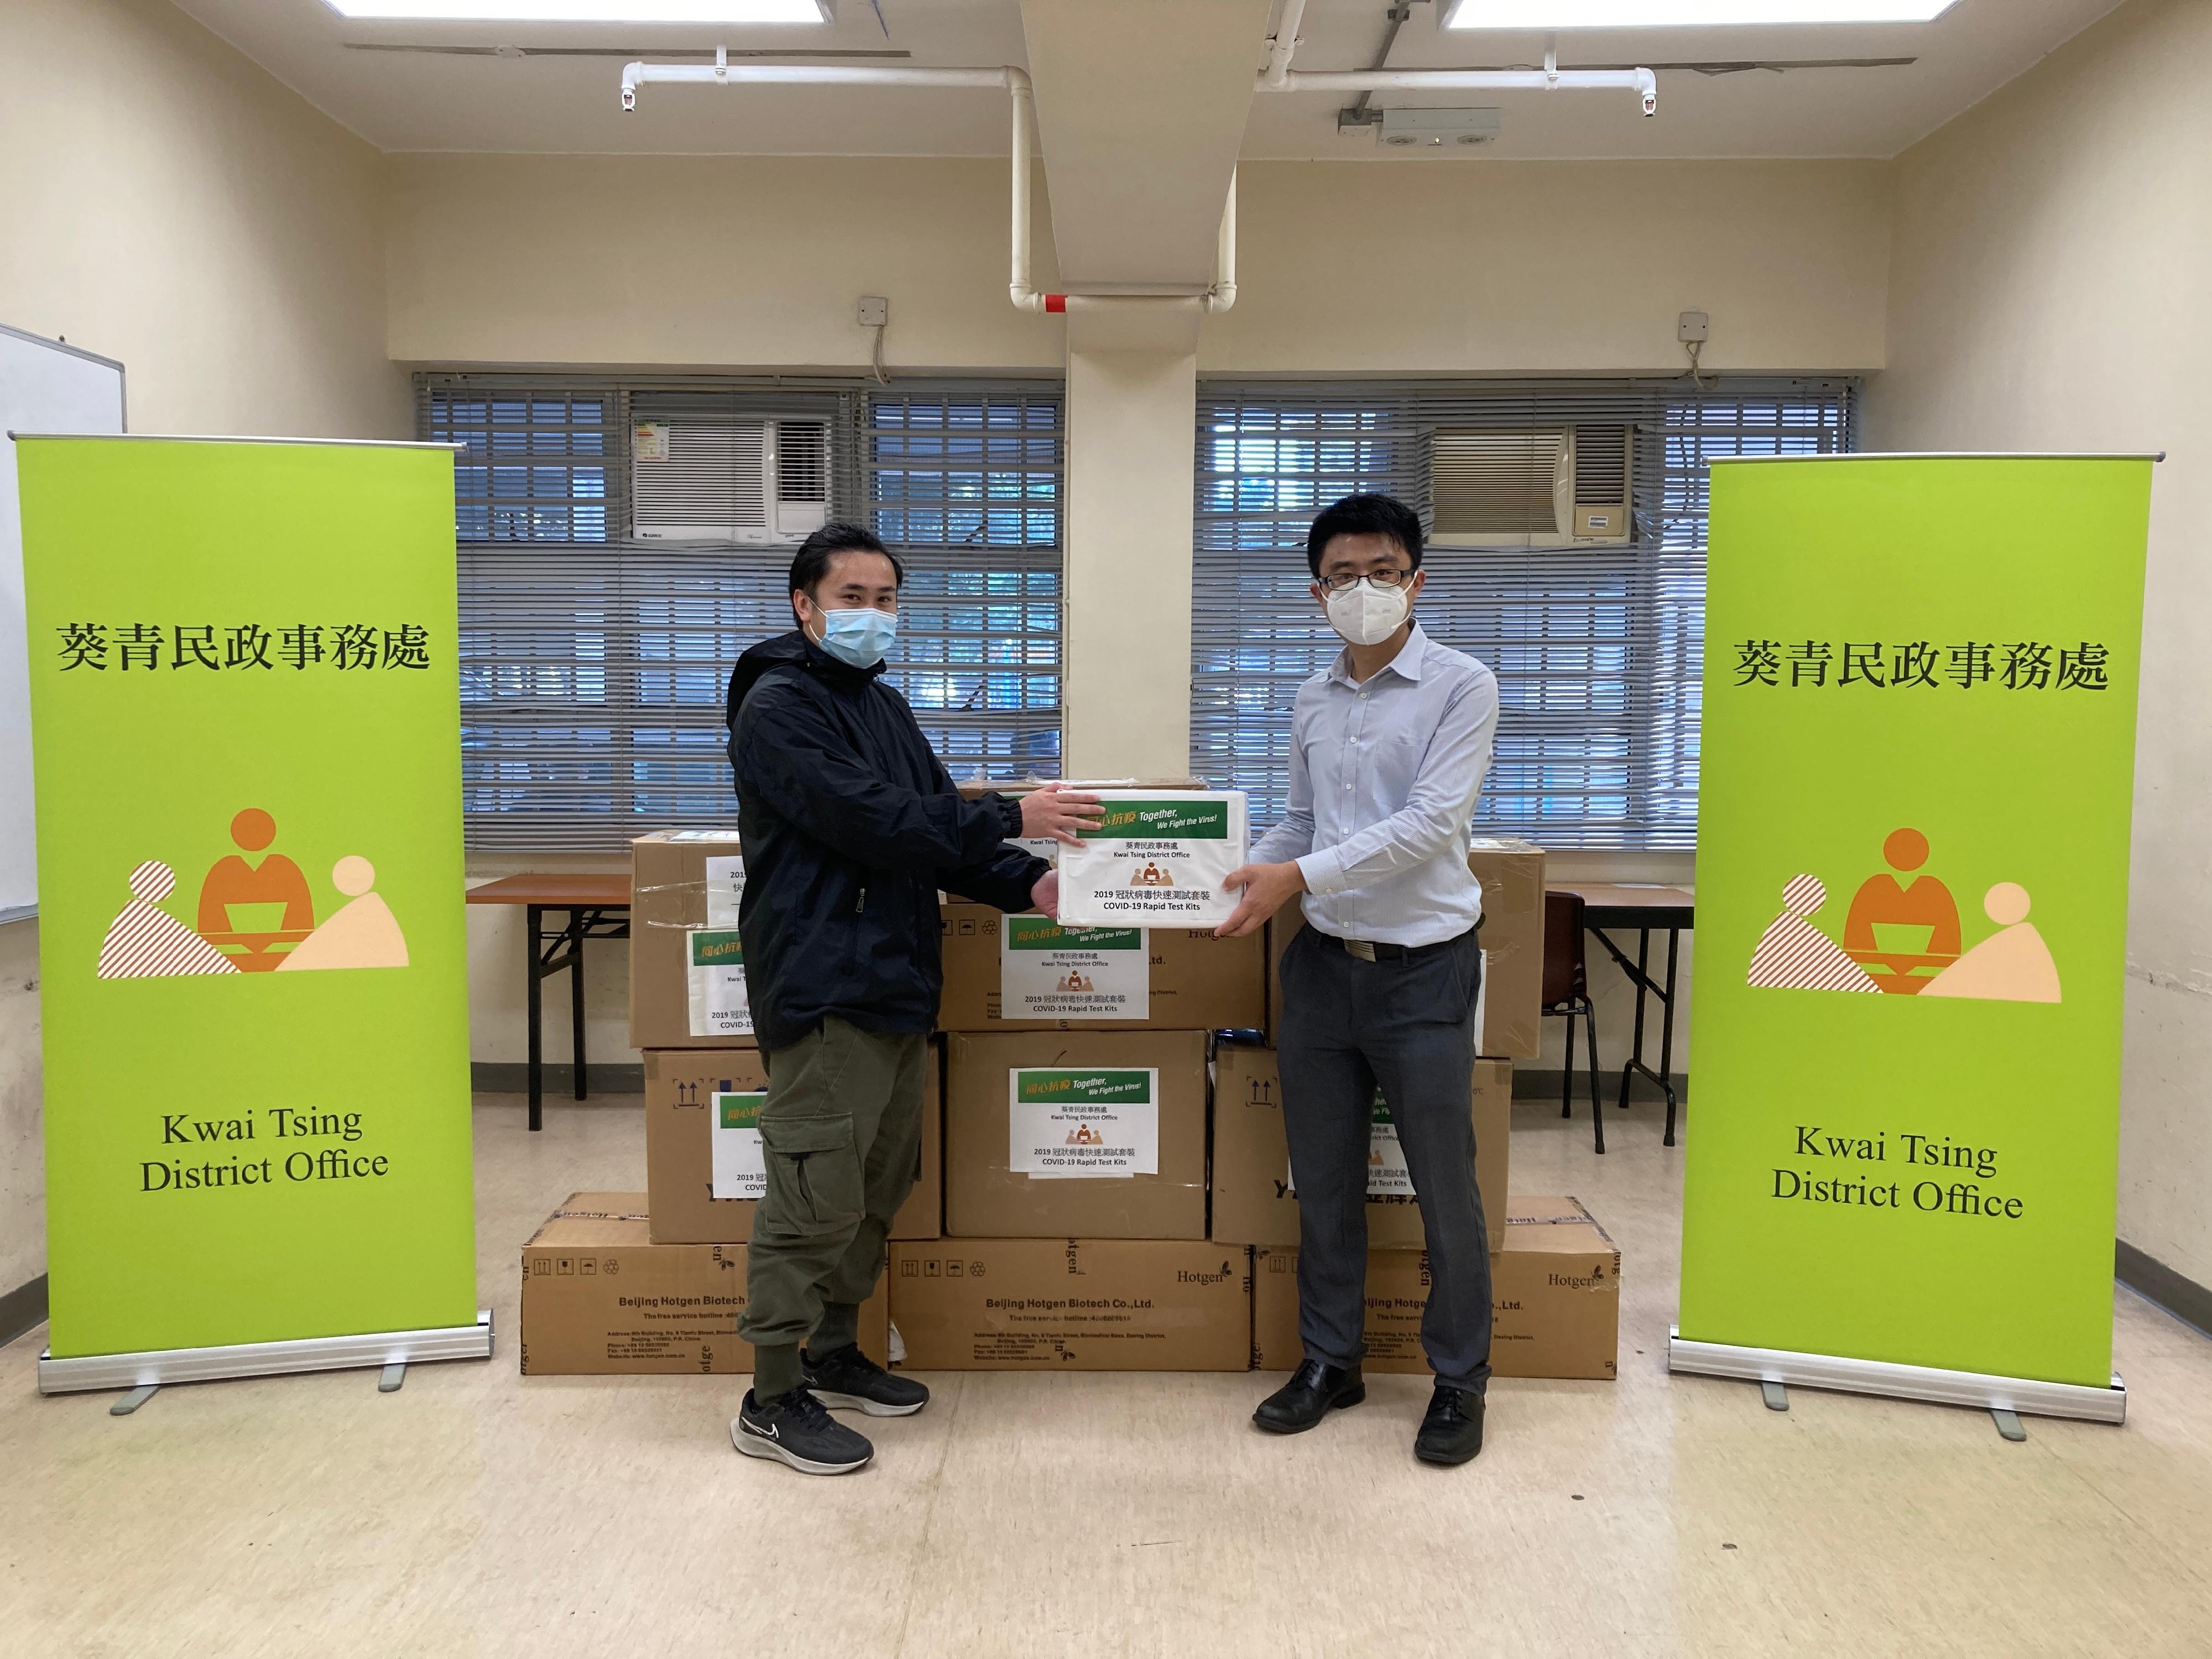 The Kwai Tsing District Office today (March 4) distributed rapid test kits to households, cleansing workers and property management staff living and working in Tivoli Garden in Tsing Yi for voluntary testing through the property management company.